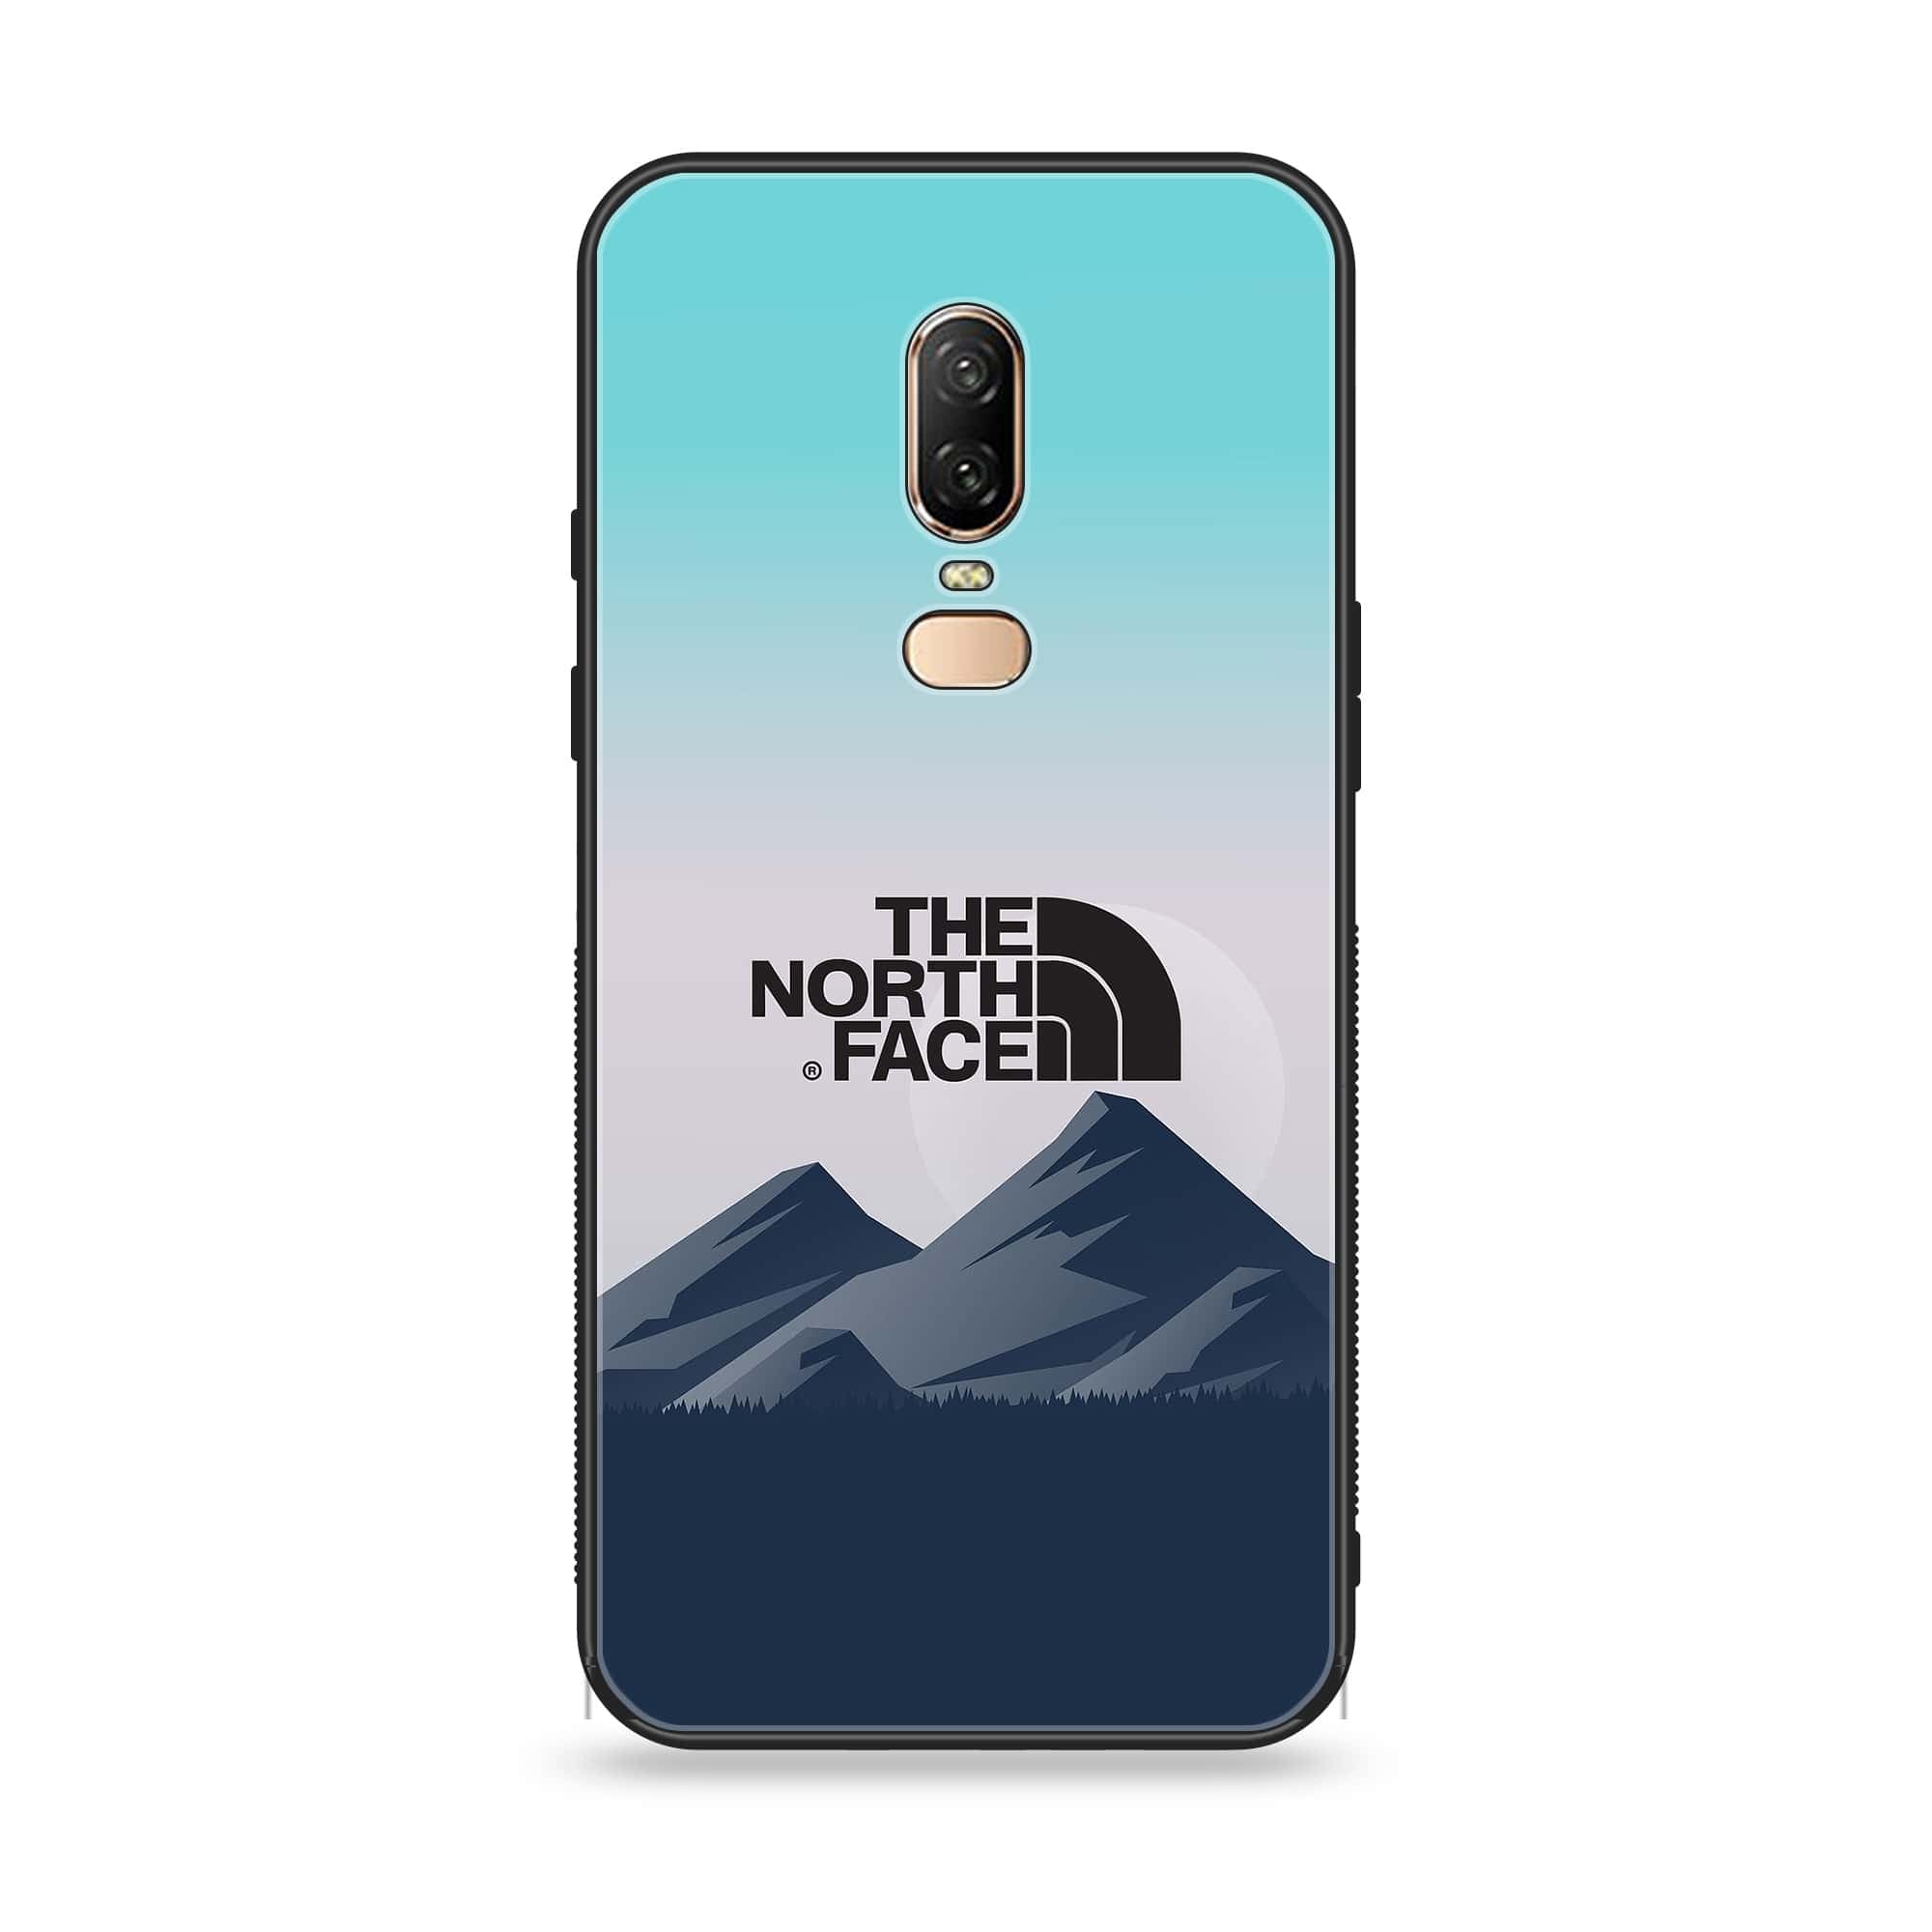 OnePlus 6 - The North Face Series - Premium Printed Glass soft Bumper shock Proof Case